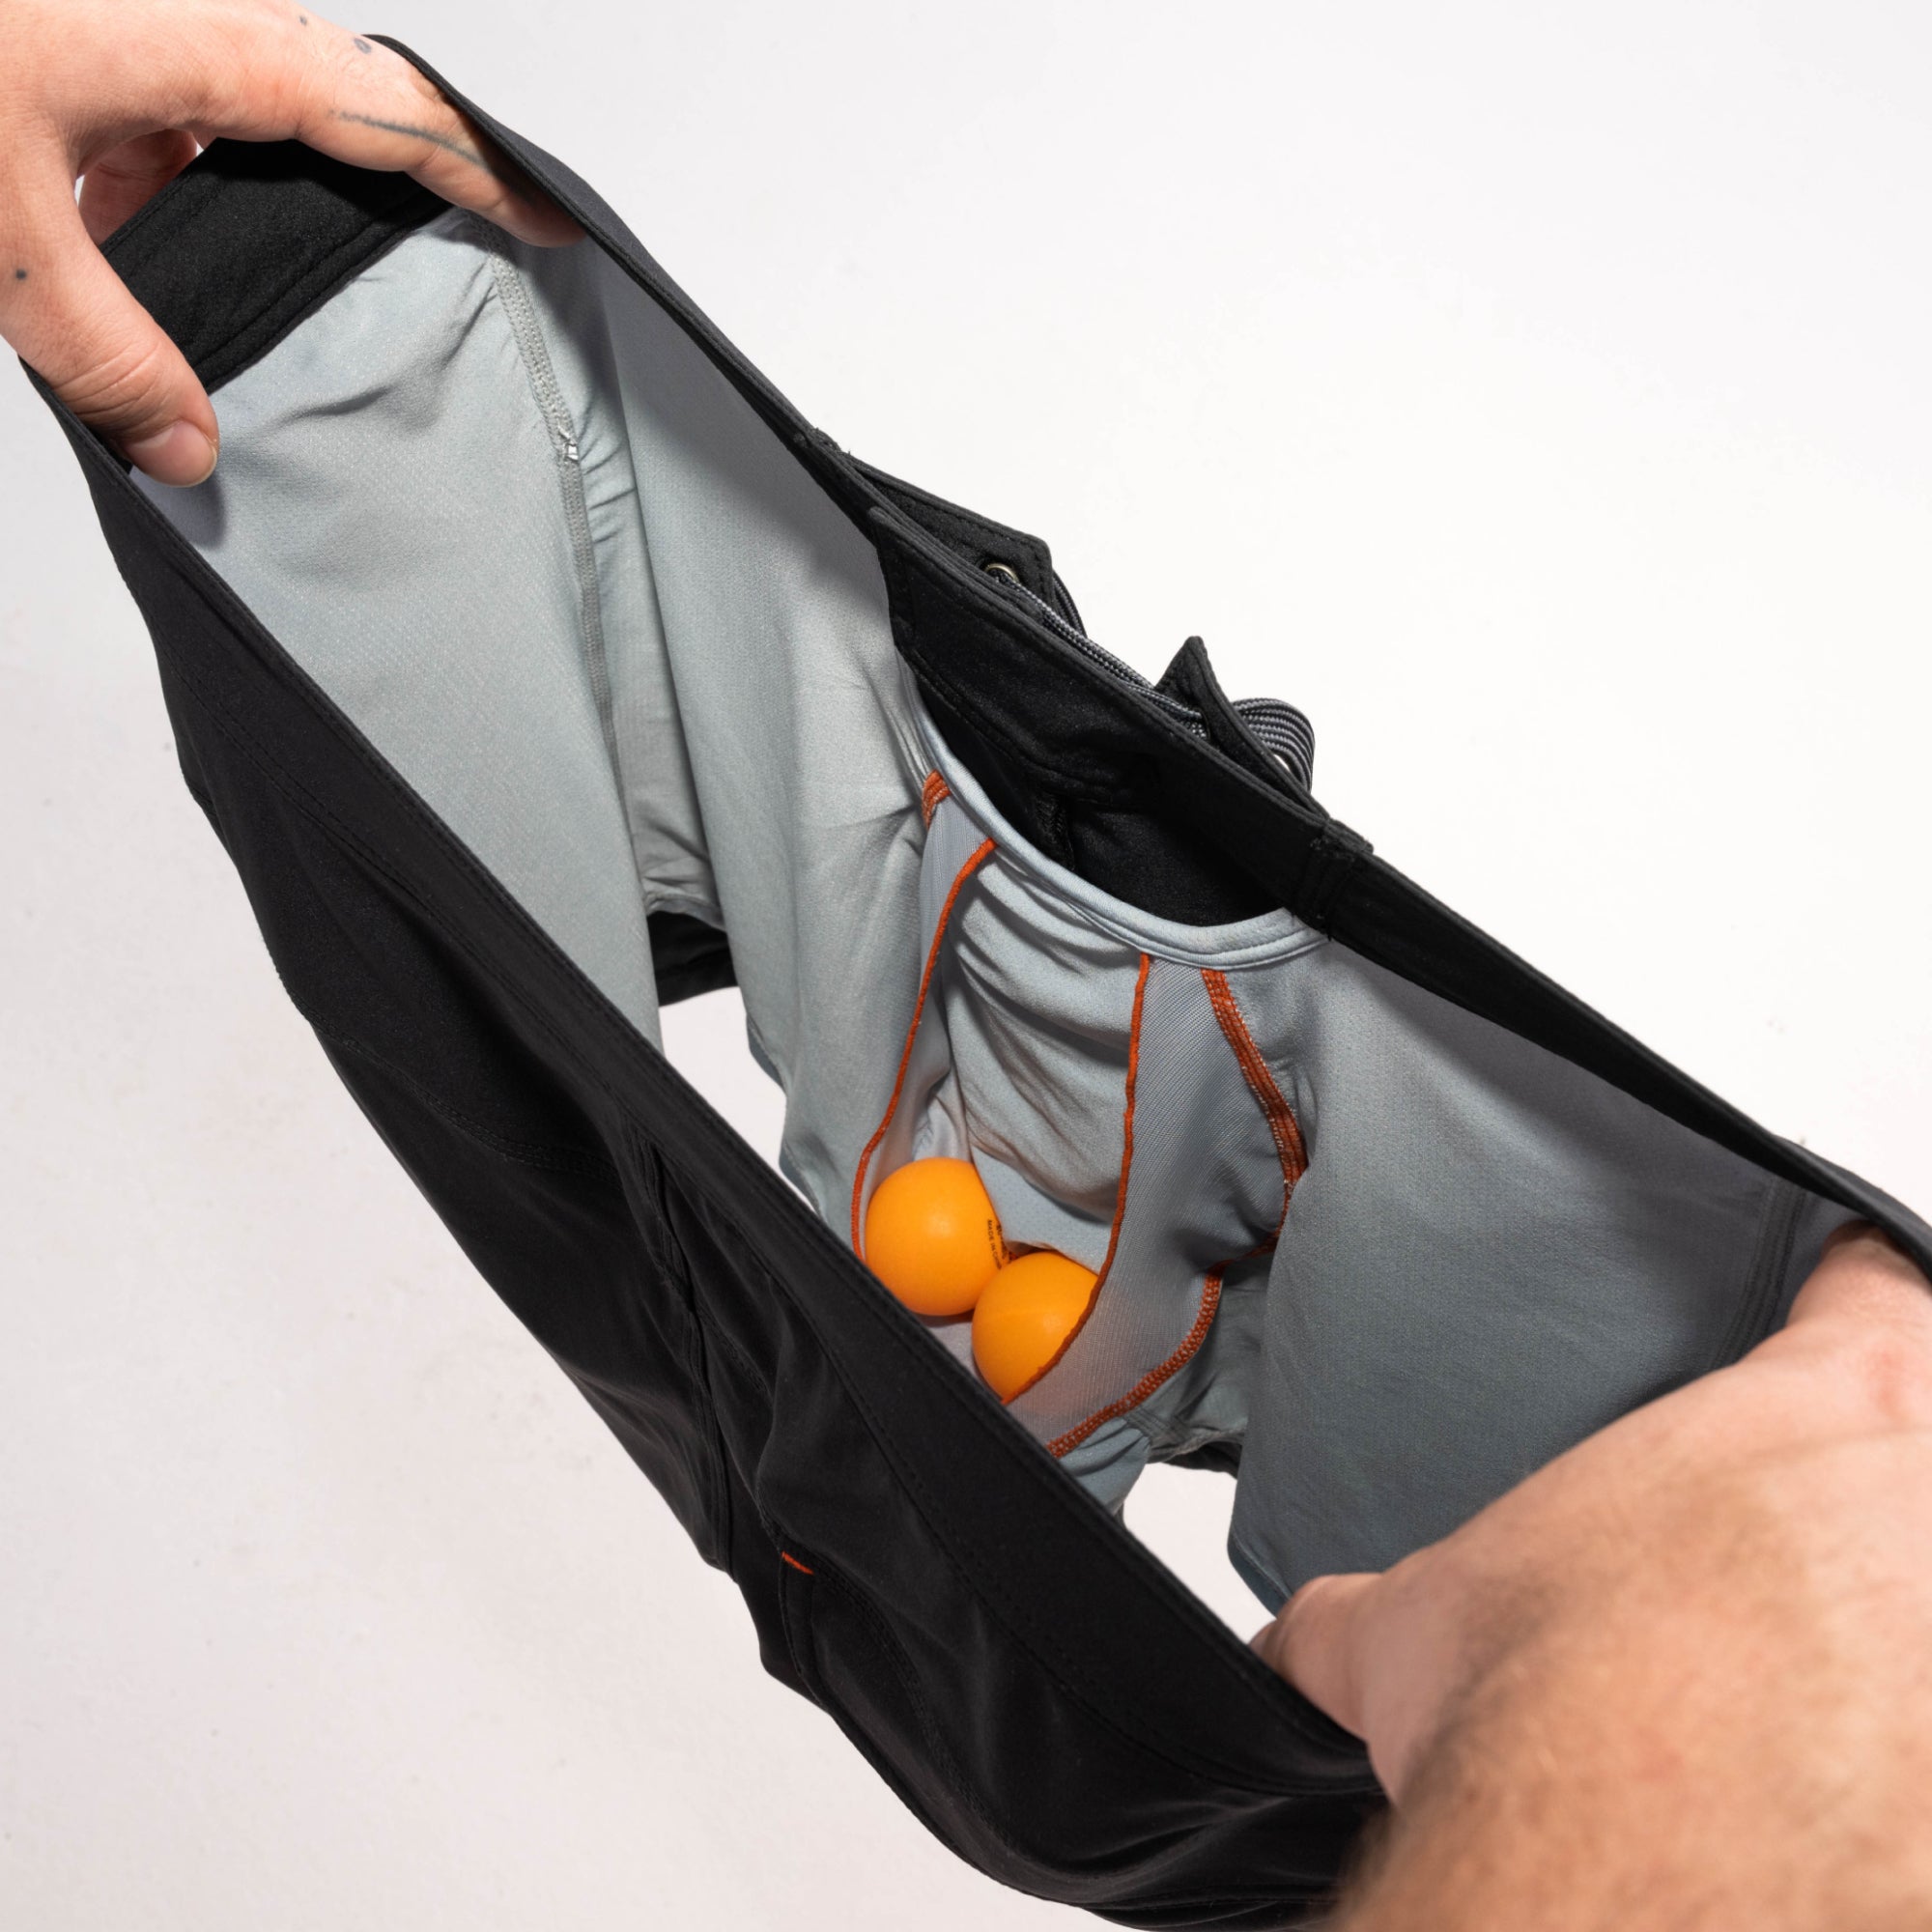 Man's hands revealing inside of 2N1 shorts showing liner with pouch holding two ping pong balls